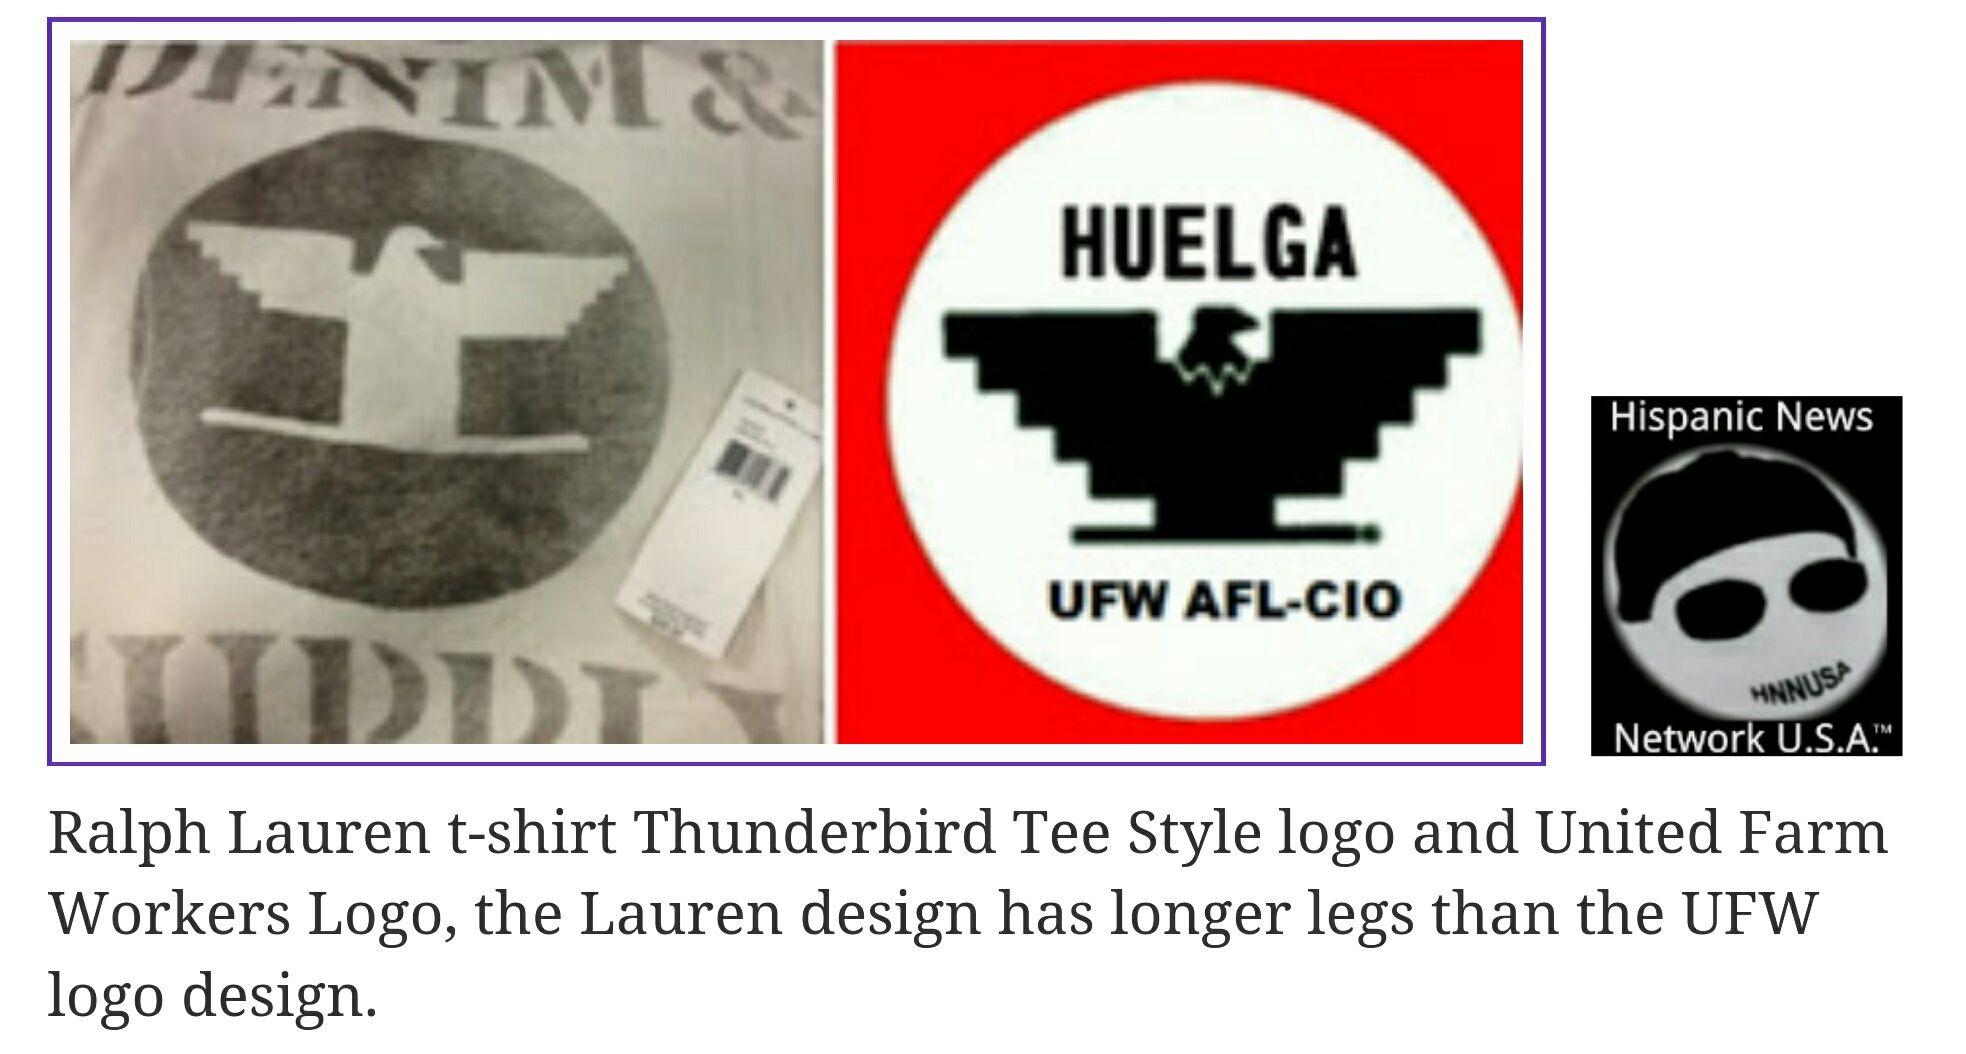 Discontinued Logo - Ralph Lauren Discontinued Use Of Thunderbird Logo On T Shirts